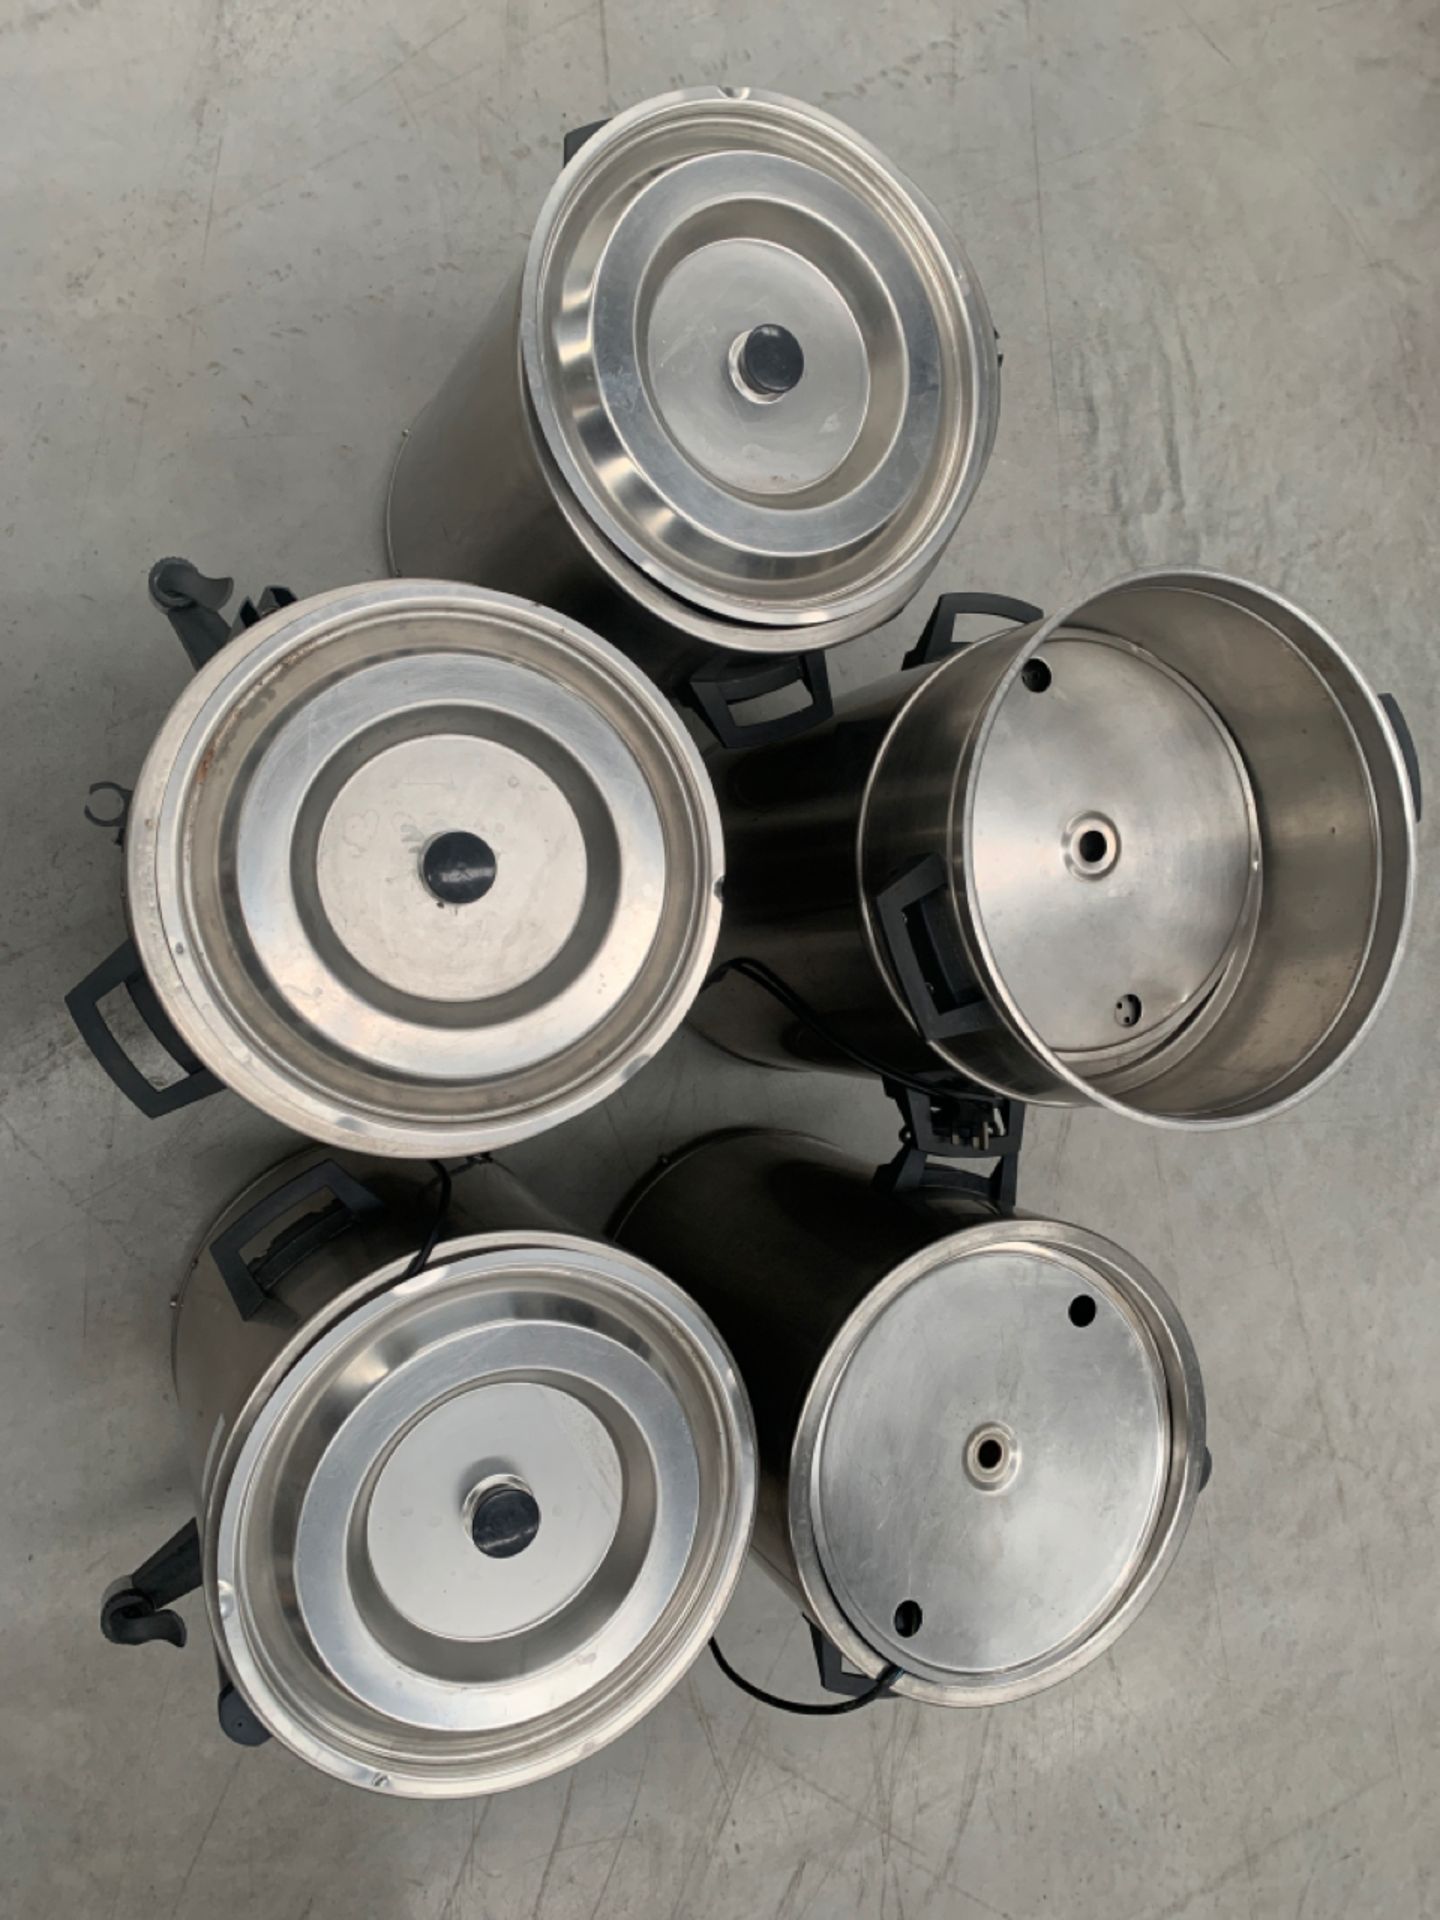 Set of 5 Stainless Steel Thermostatically Controlled 20L Coffee Containers - Image 5 of 5